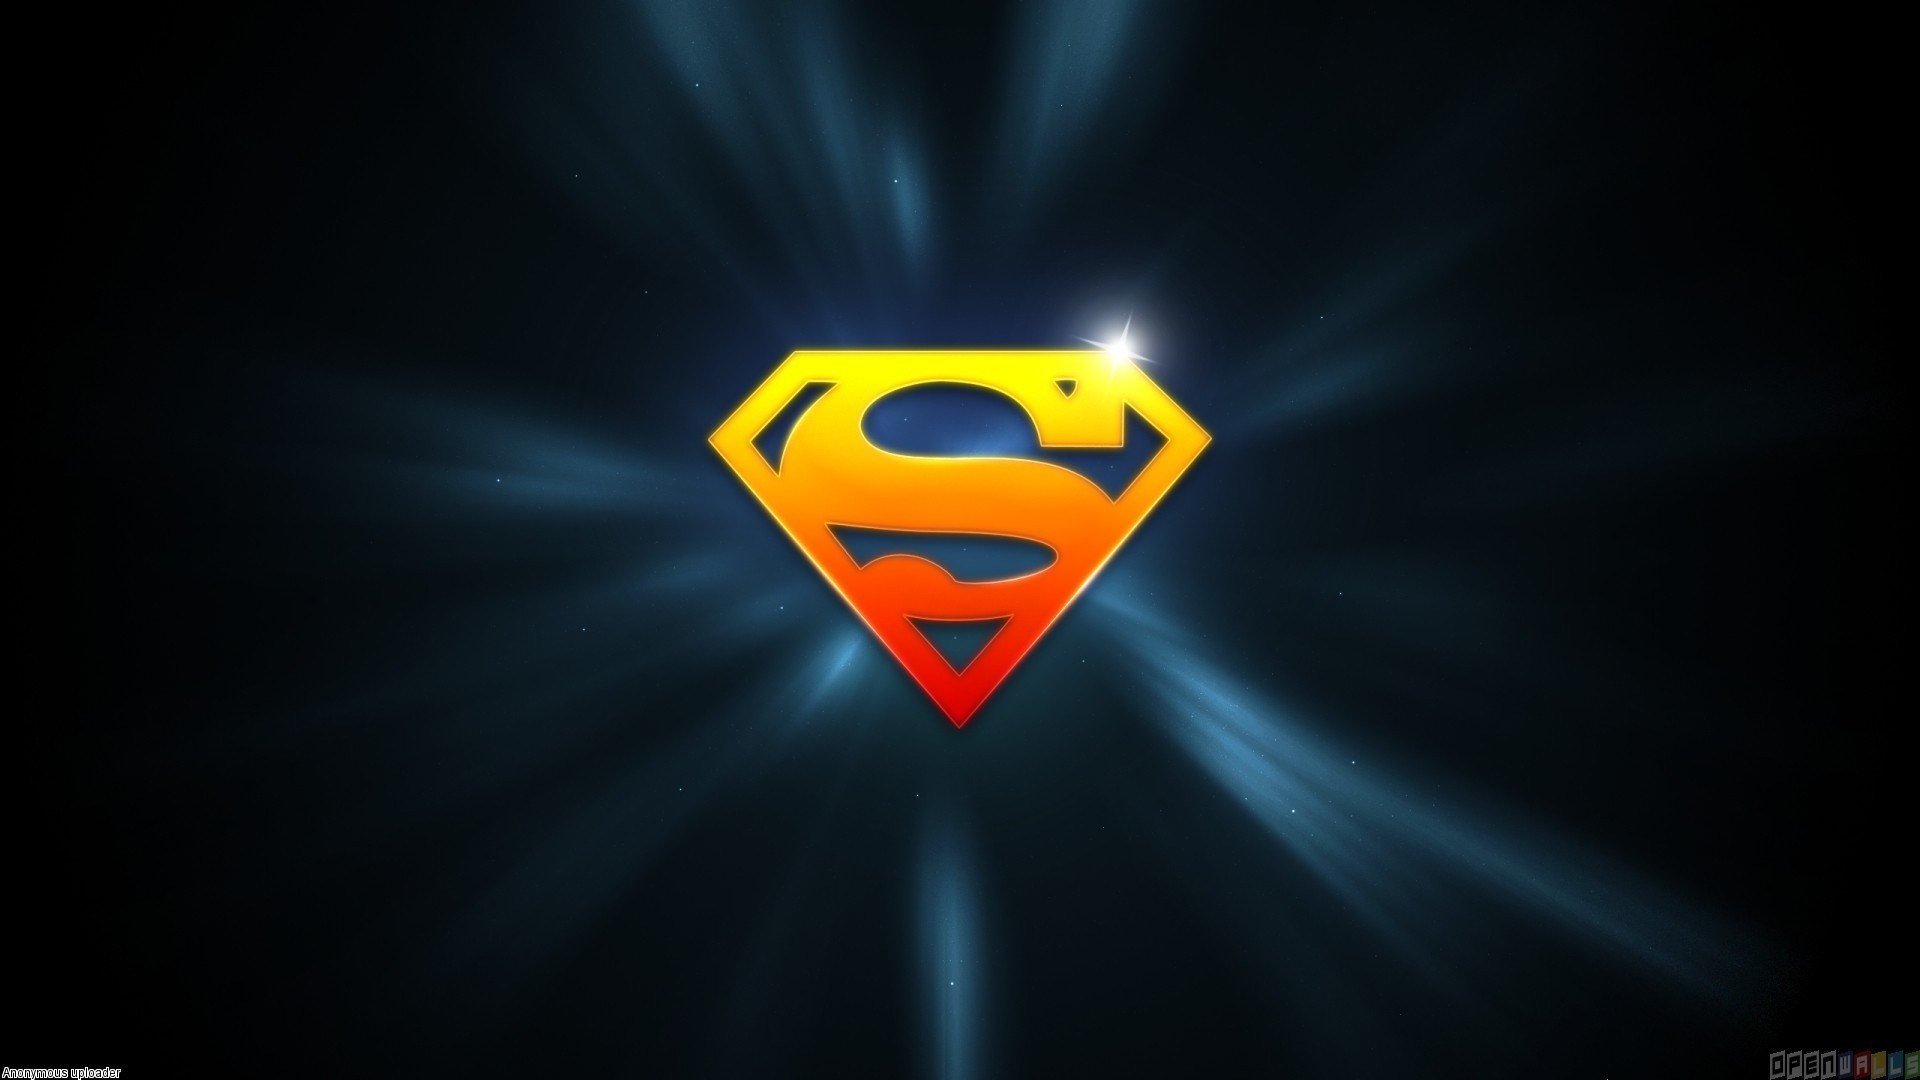 1920x1080 Today Wallpaper Download picture parts of Superman Cool Image Hd Wallpaper  WallpaperLepi, we present have nice ...